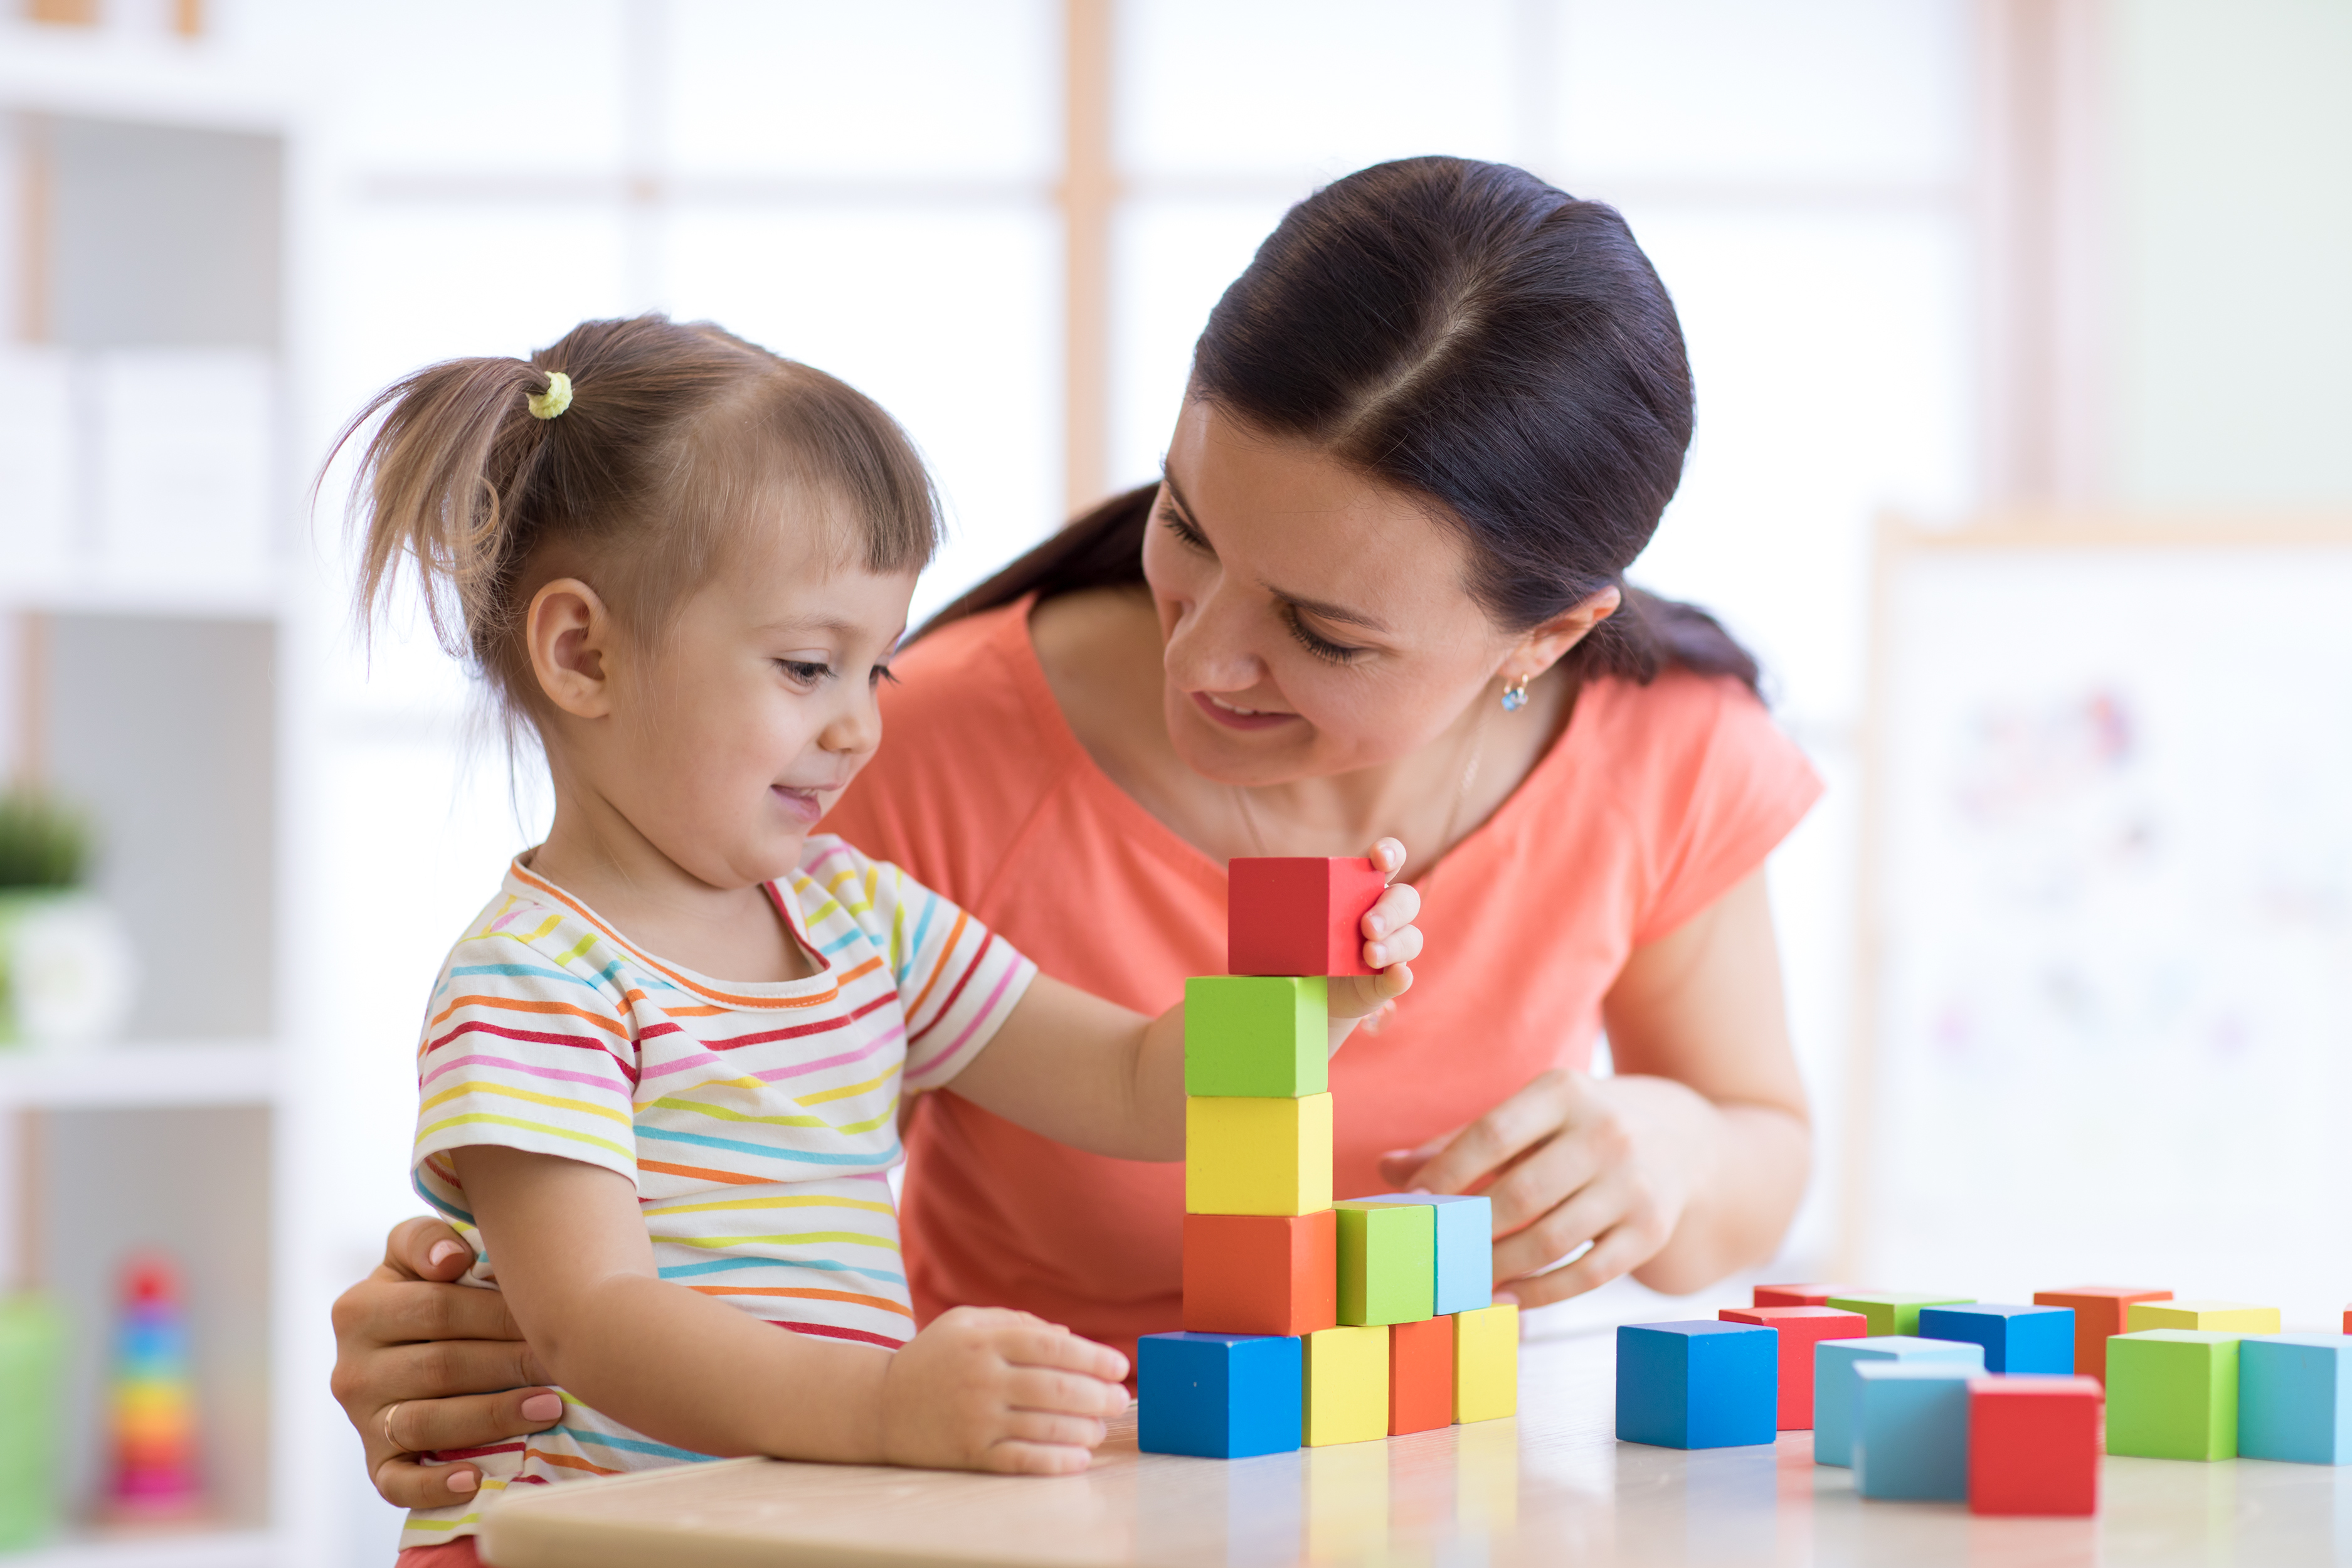 Lady and kid girl playing educational toys at kindergarten or nursery room